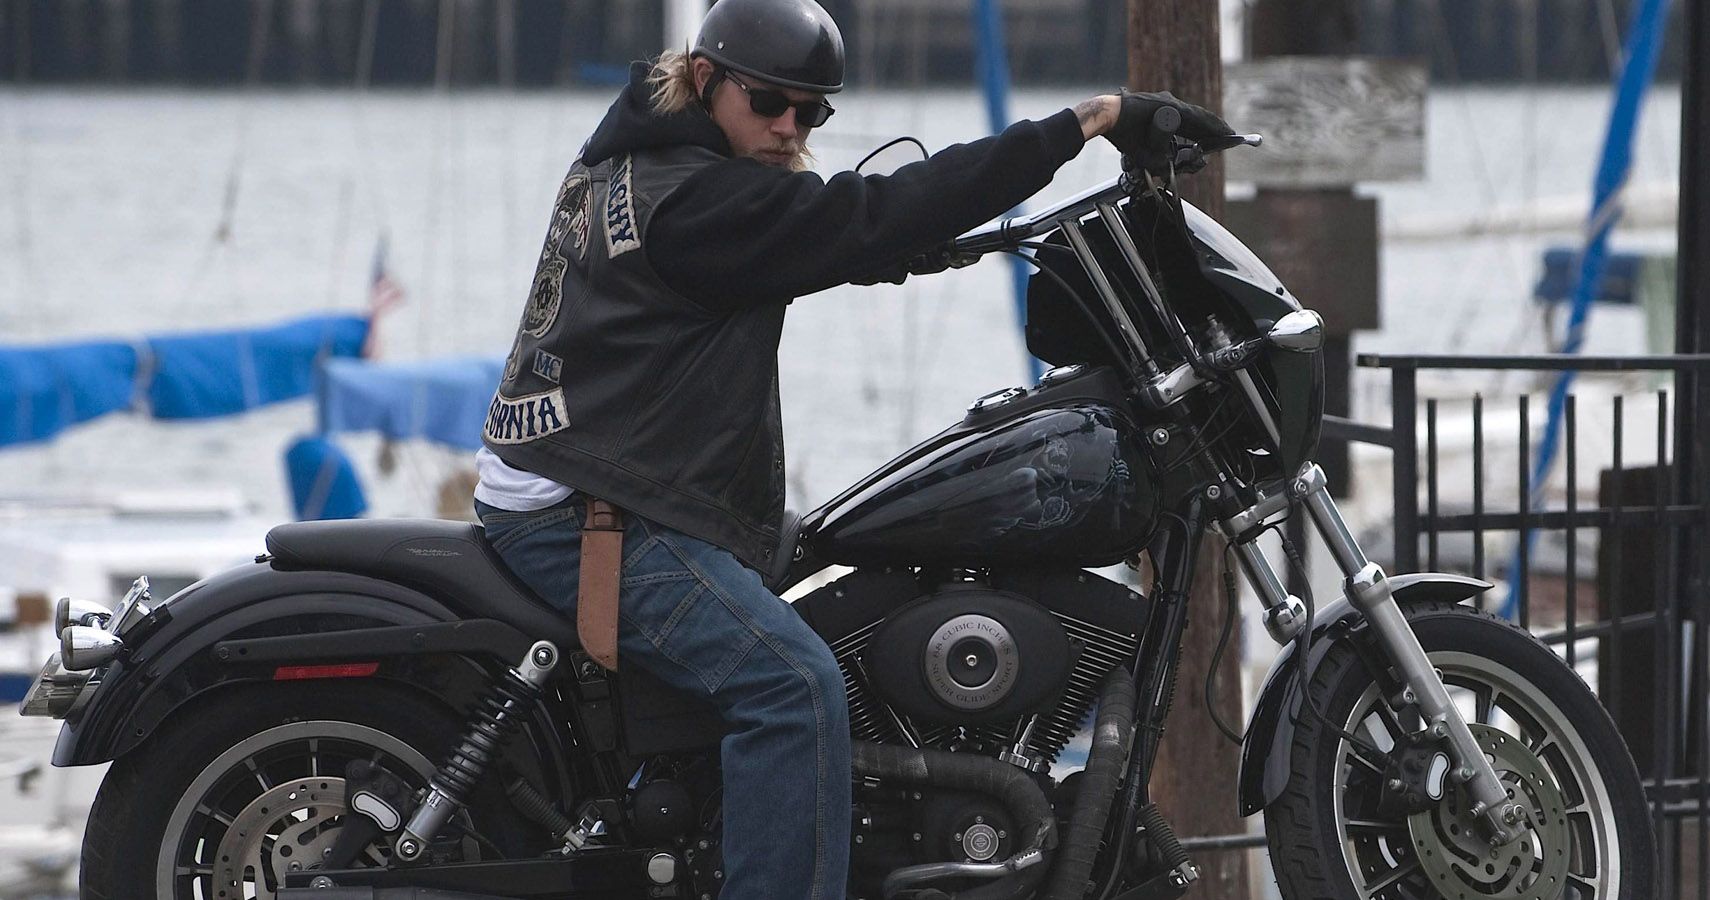 Sons Of Anarchy 5 Coolest Bikes (& 5 We'd Completely Avoid)